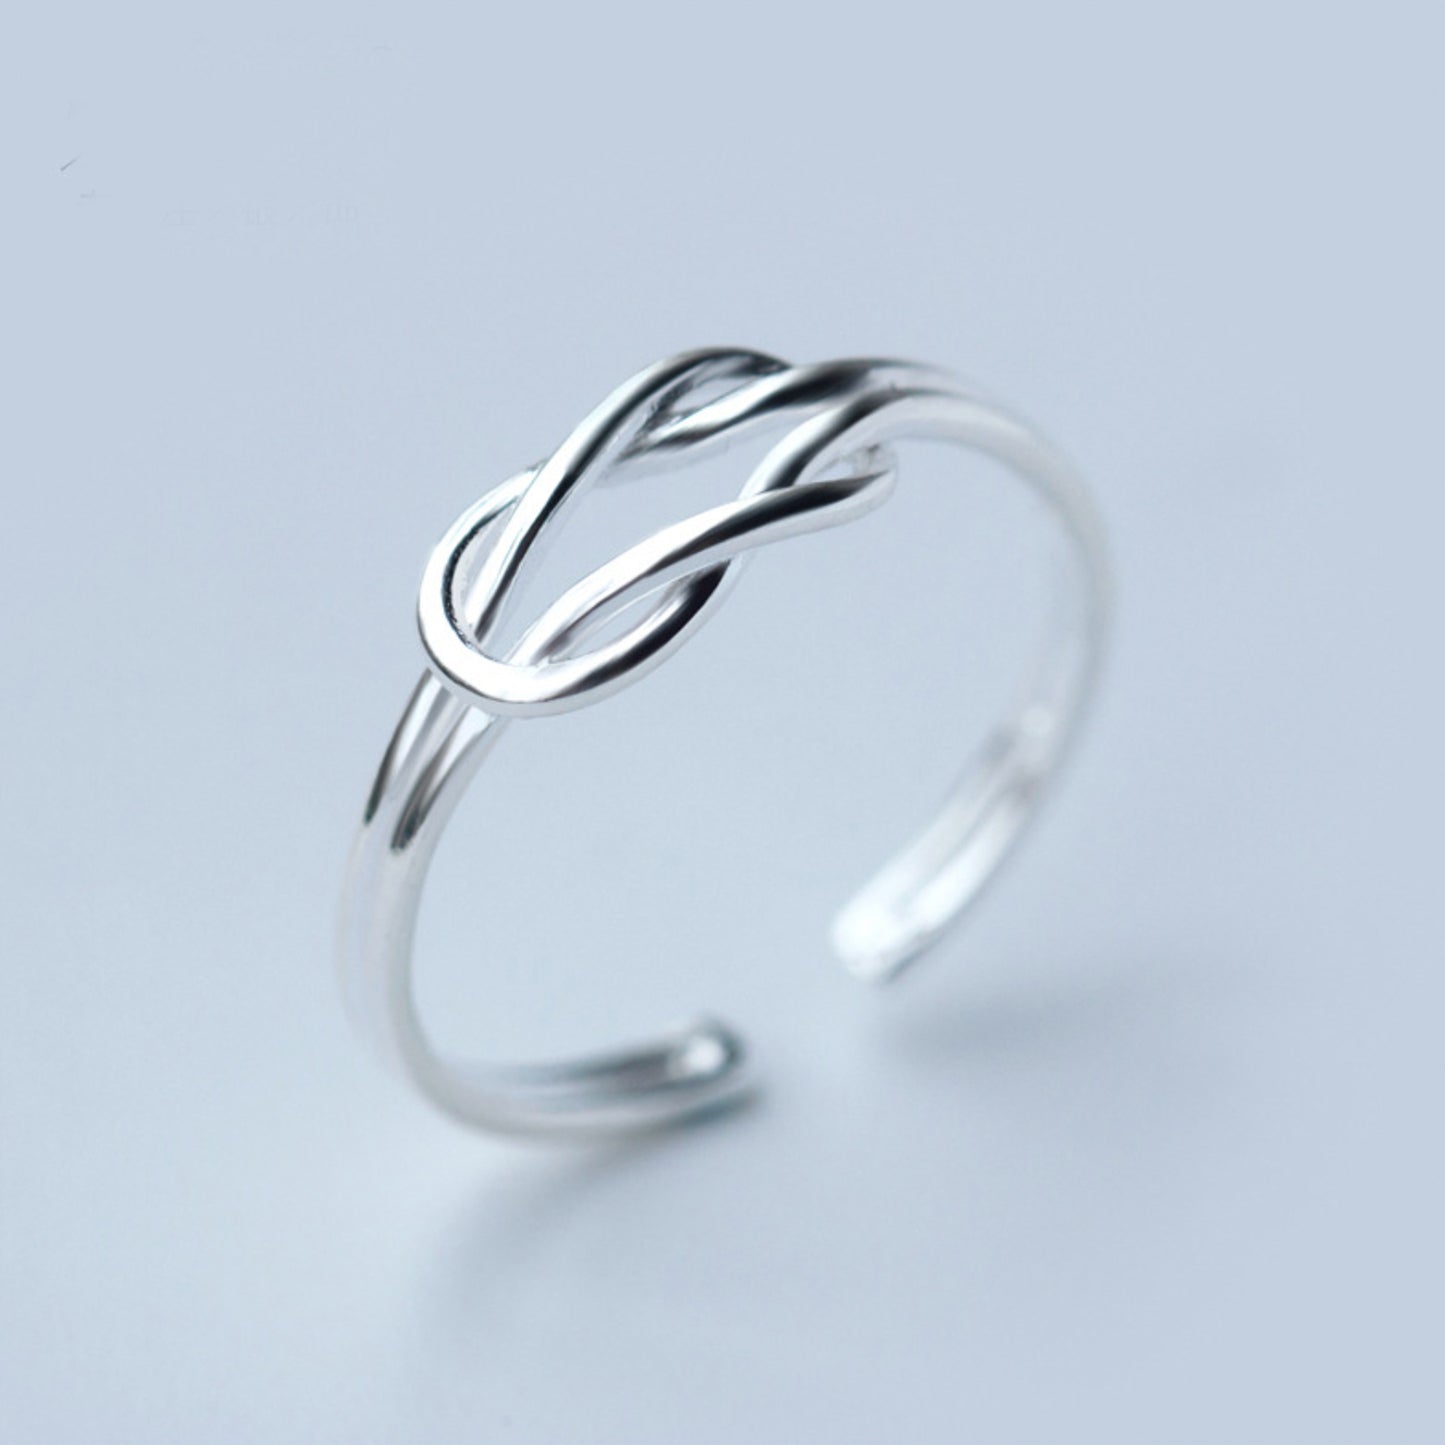 Adjustable Knot Ring